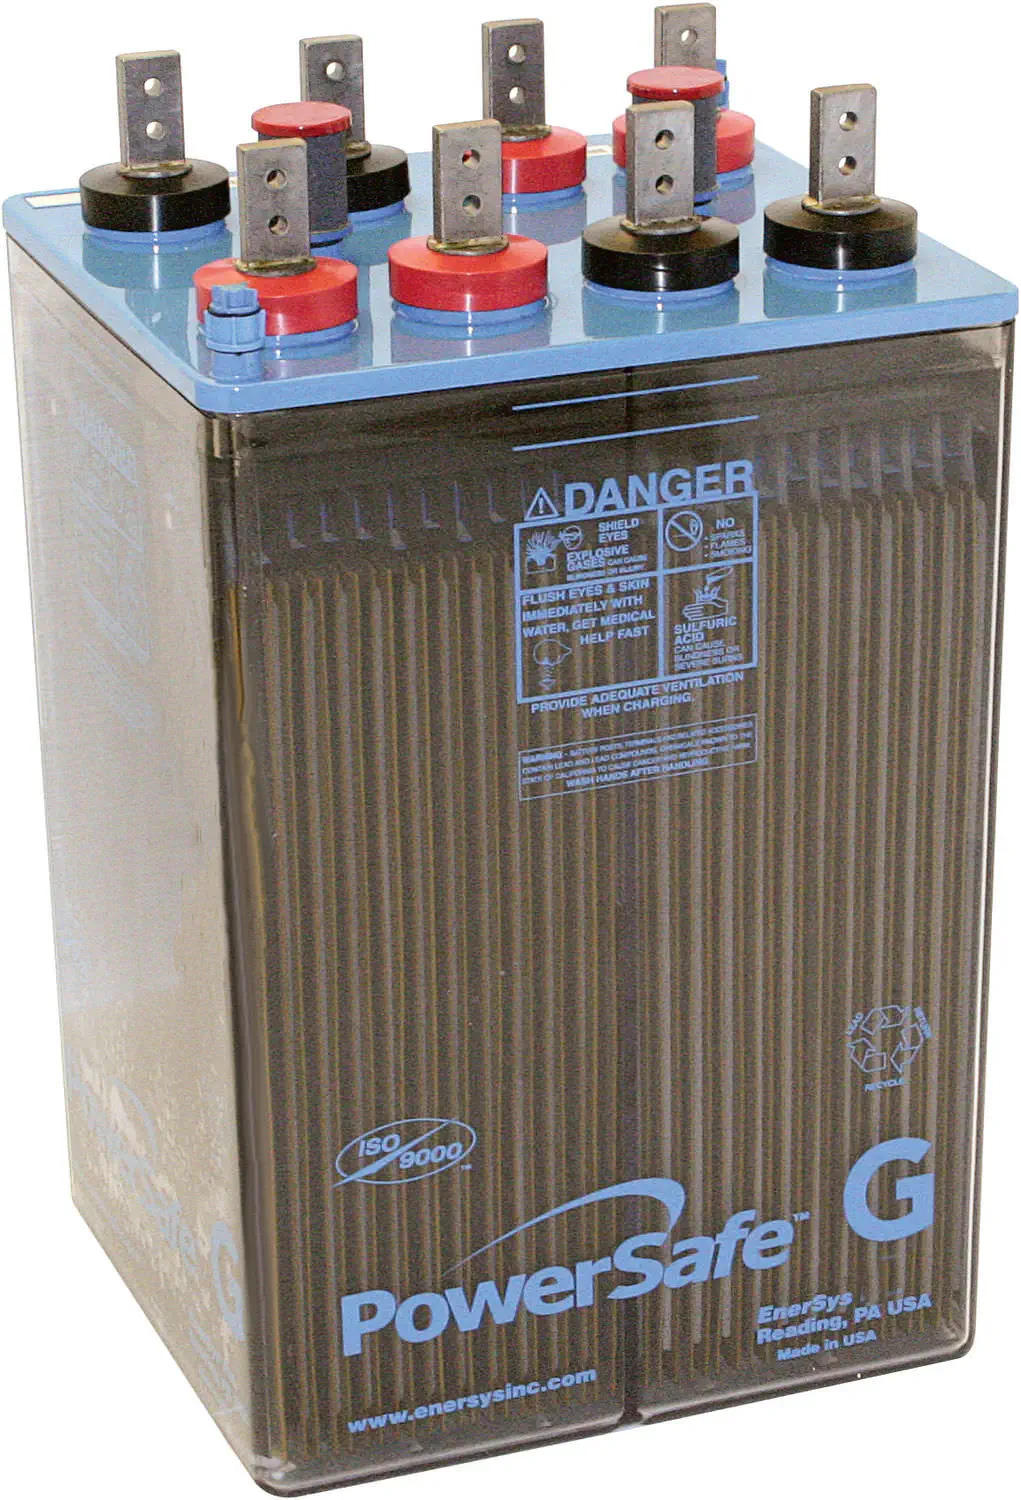 EnerSys PowerSafe GN-33